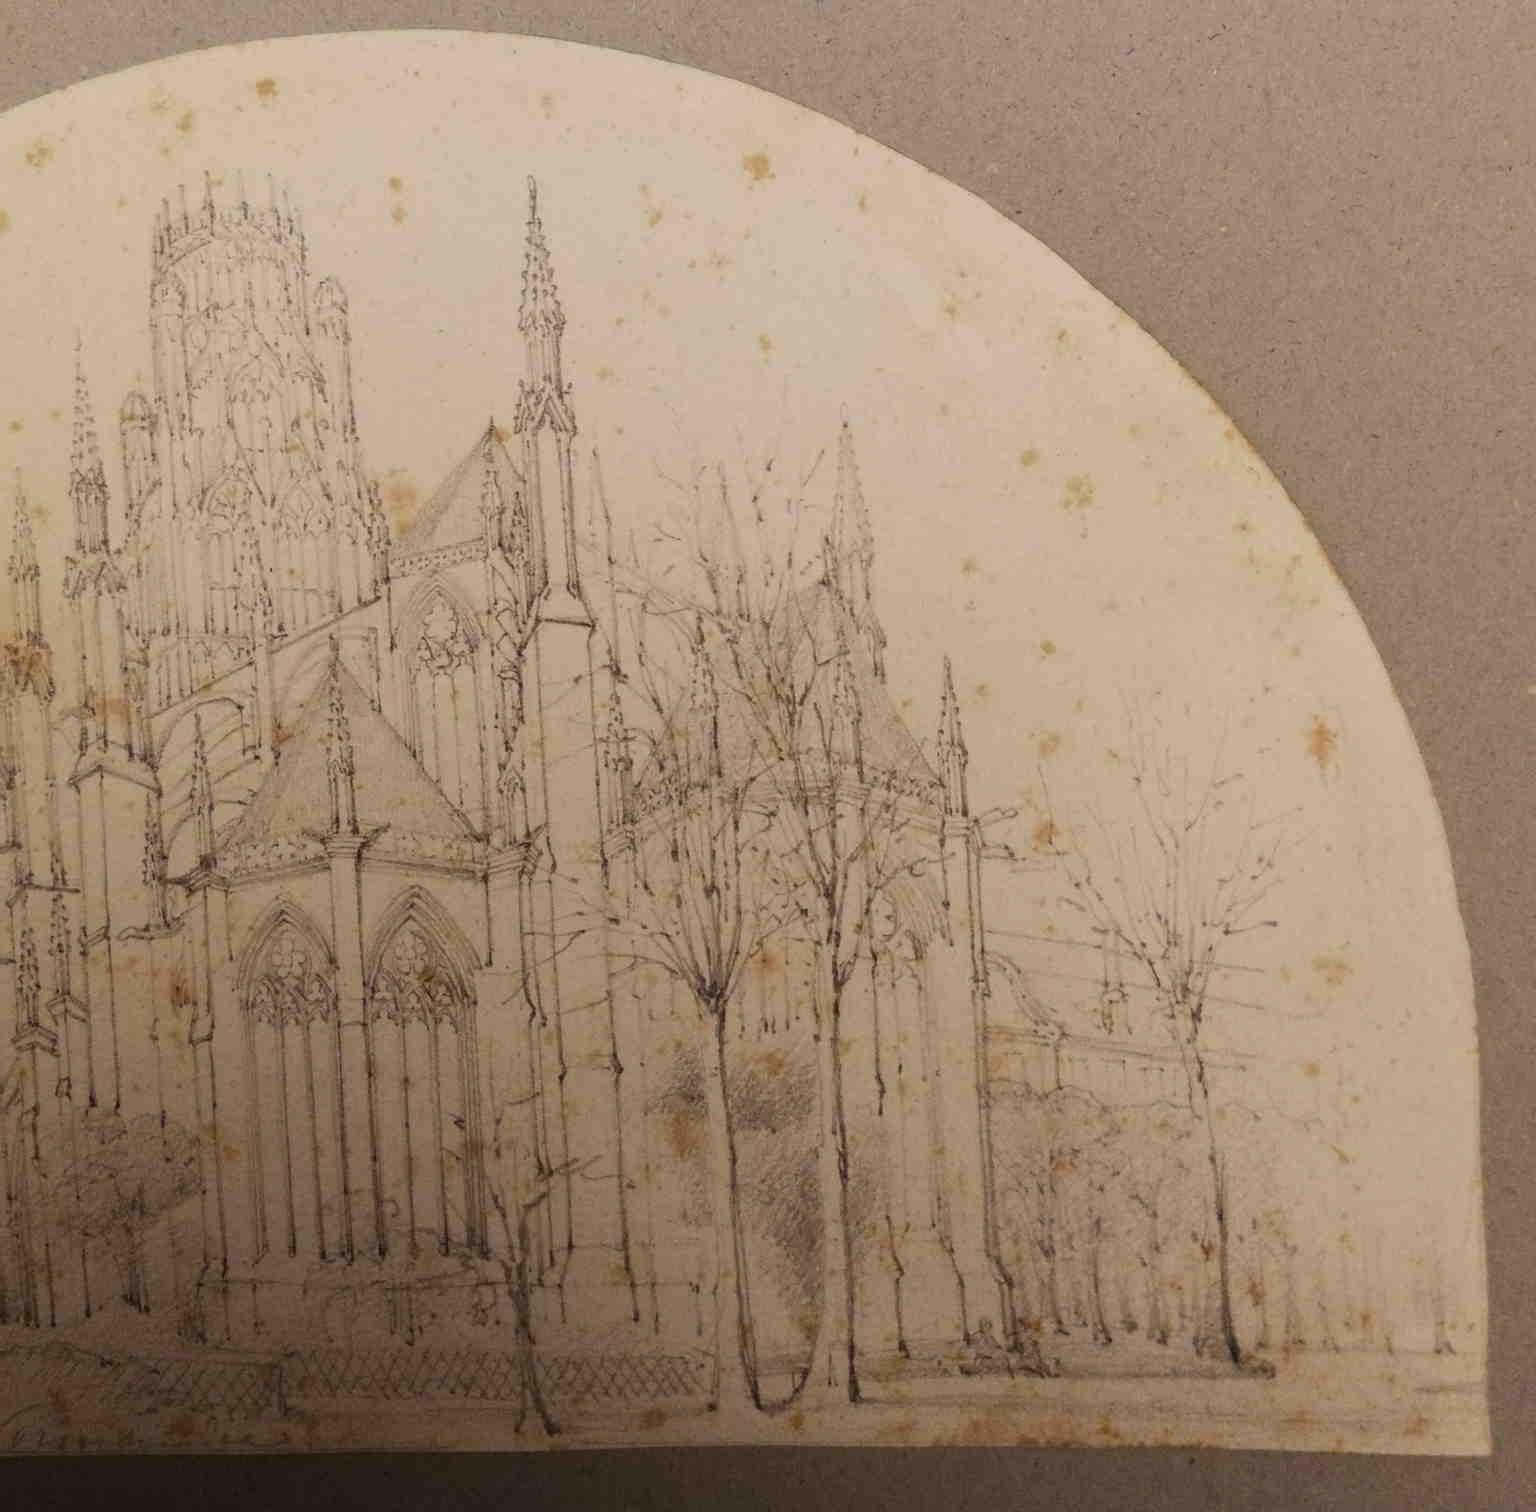 French Abbey Rouen Landscape Drawing 19 century pencil paper - Other Art Style Art by Unknown